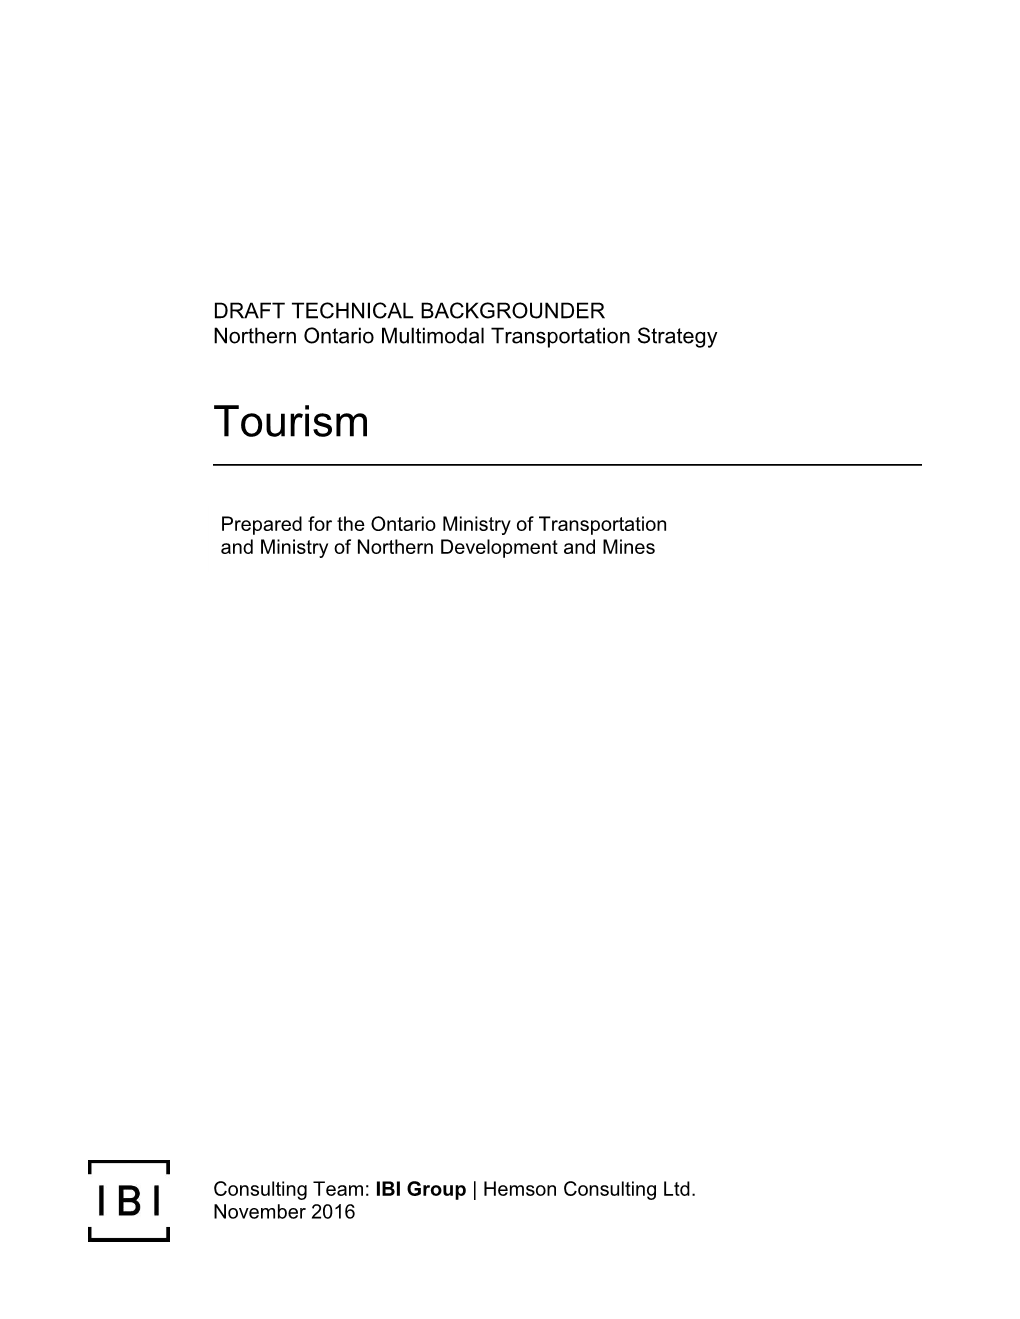 Tourism Draft Technical Backgrounder